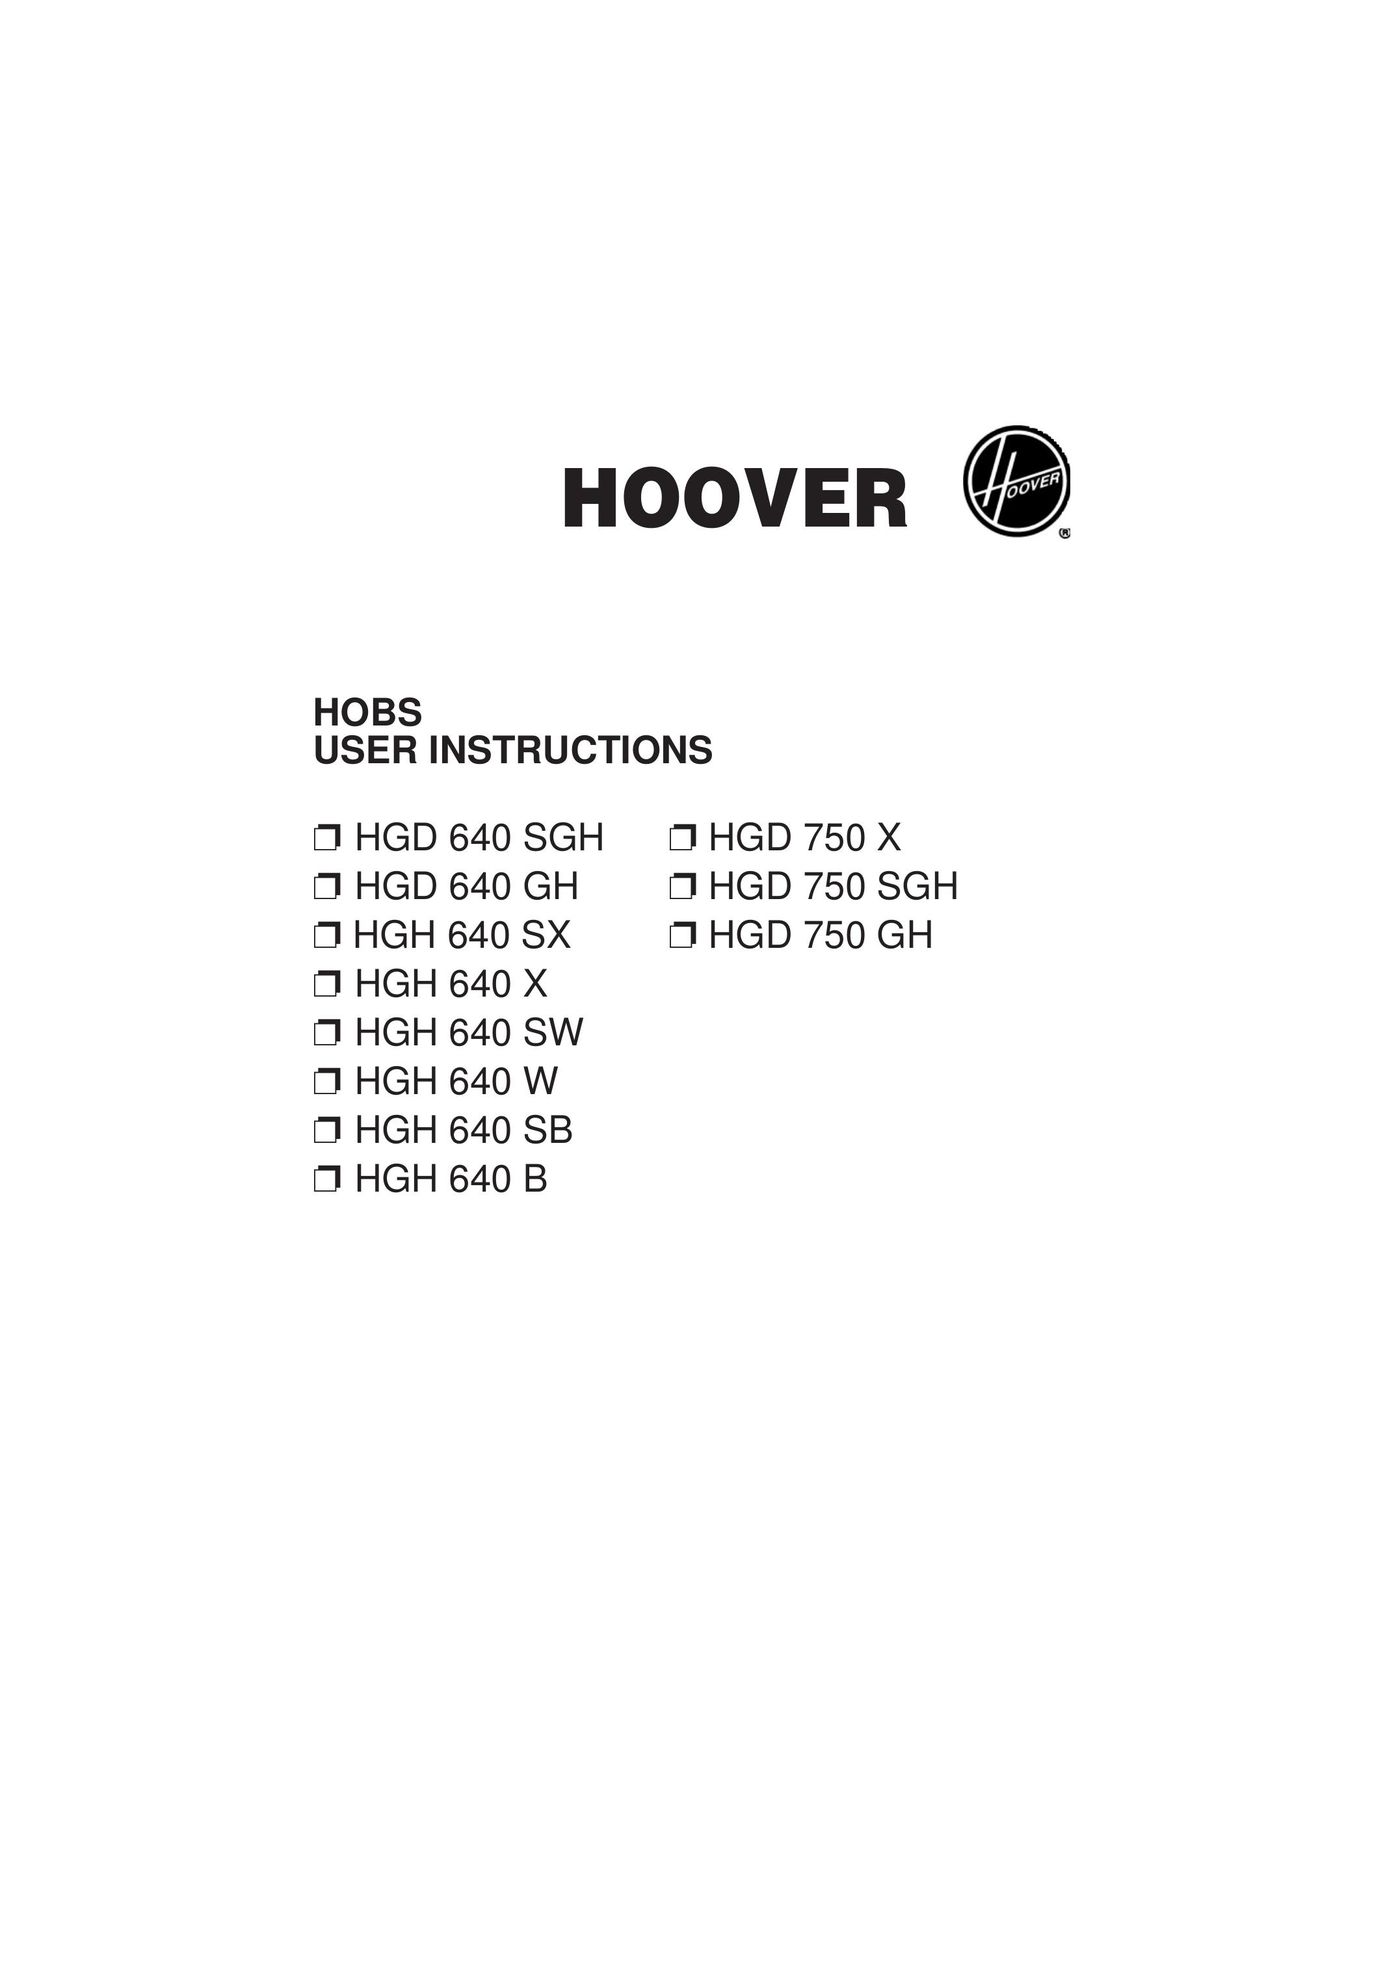 Hoover HGH 640 SX Cooktop User Manual